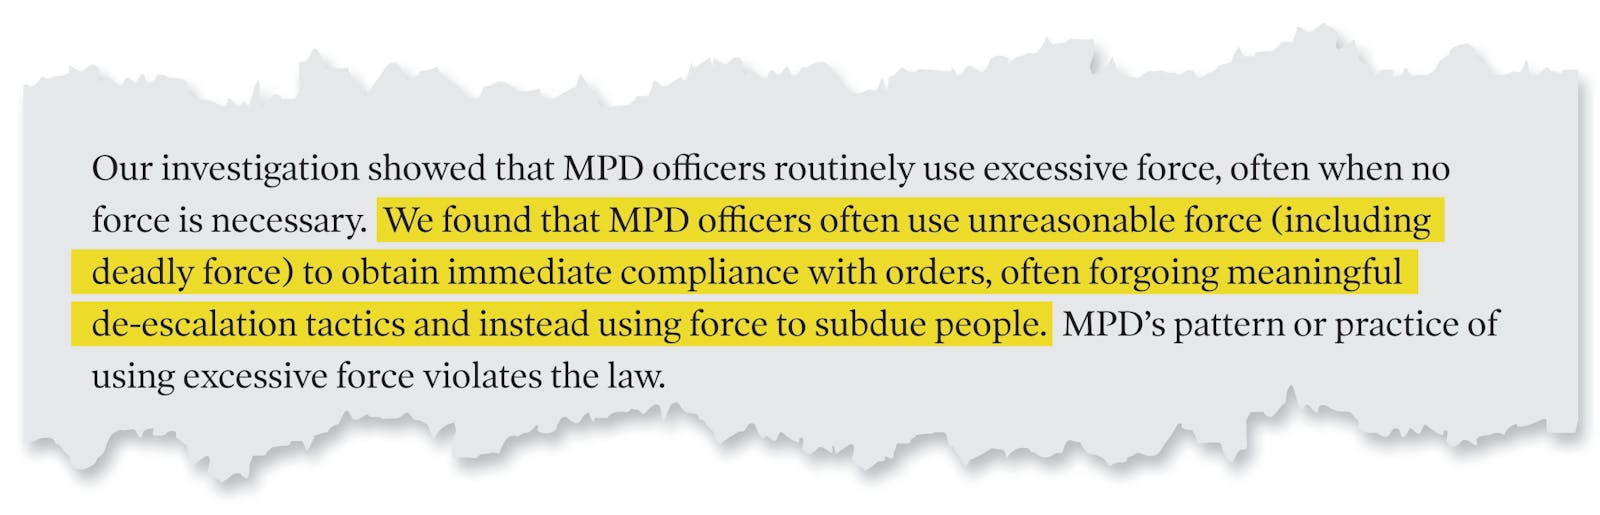 A page tear from the Department of Justice's report that reads: 'Our investigation showed that MPD officers routinely use excessive force, often when no force is necessary. We found that MPD officers often use unreasonable force (including deadly force) to obtain immediate compliance with orders, often forgoing meaningful de-escalation tactics and instead using force to subdue people. MPD's pattern or practice of using excessive force violates the law.'